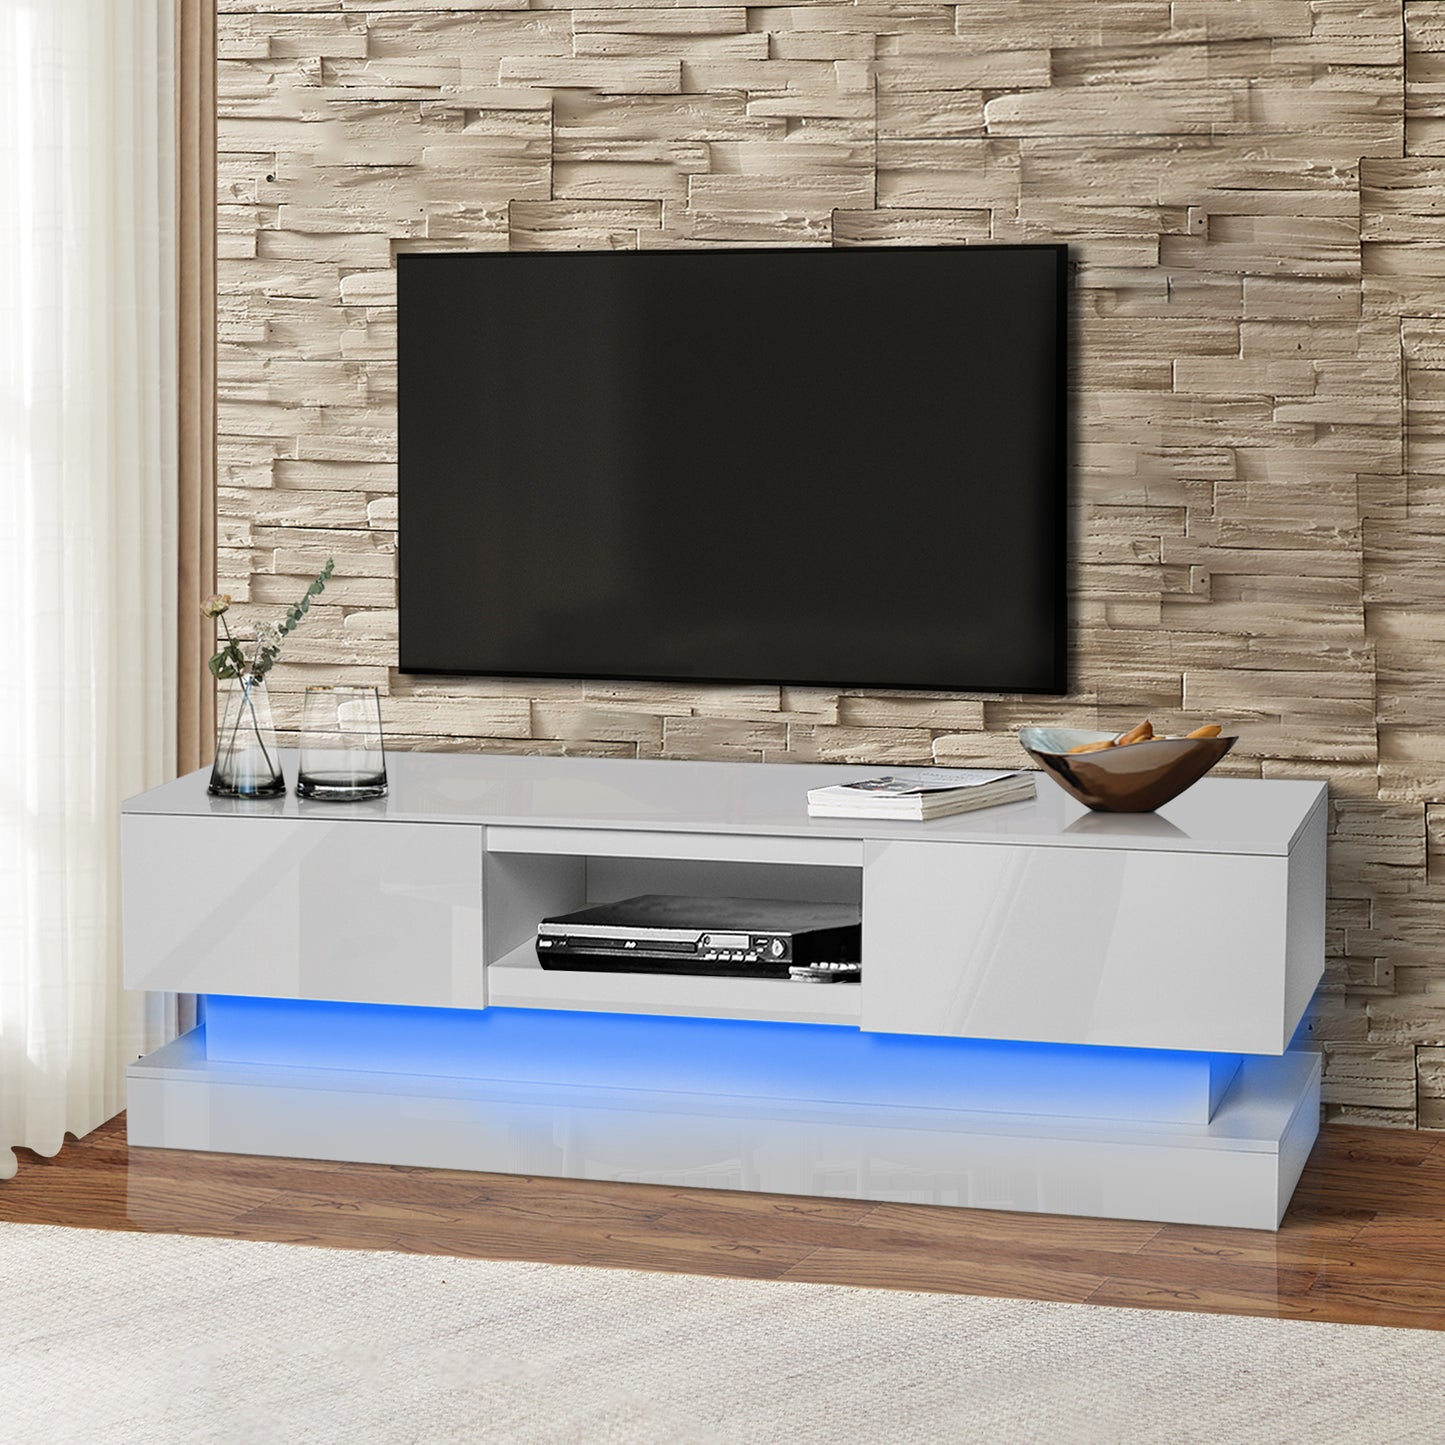 63inch  WHITE morden TV Stand with LED Lights,high glossy front TV Cabinet,can be assembled in Lounge Room, Living Room or Bedroom,color:WHITE - Enova Luxe Home Store